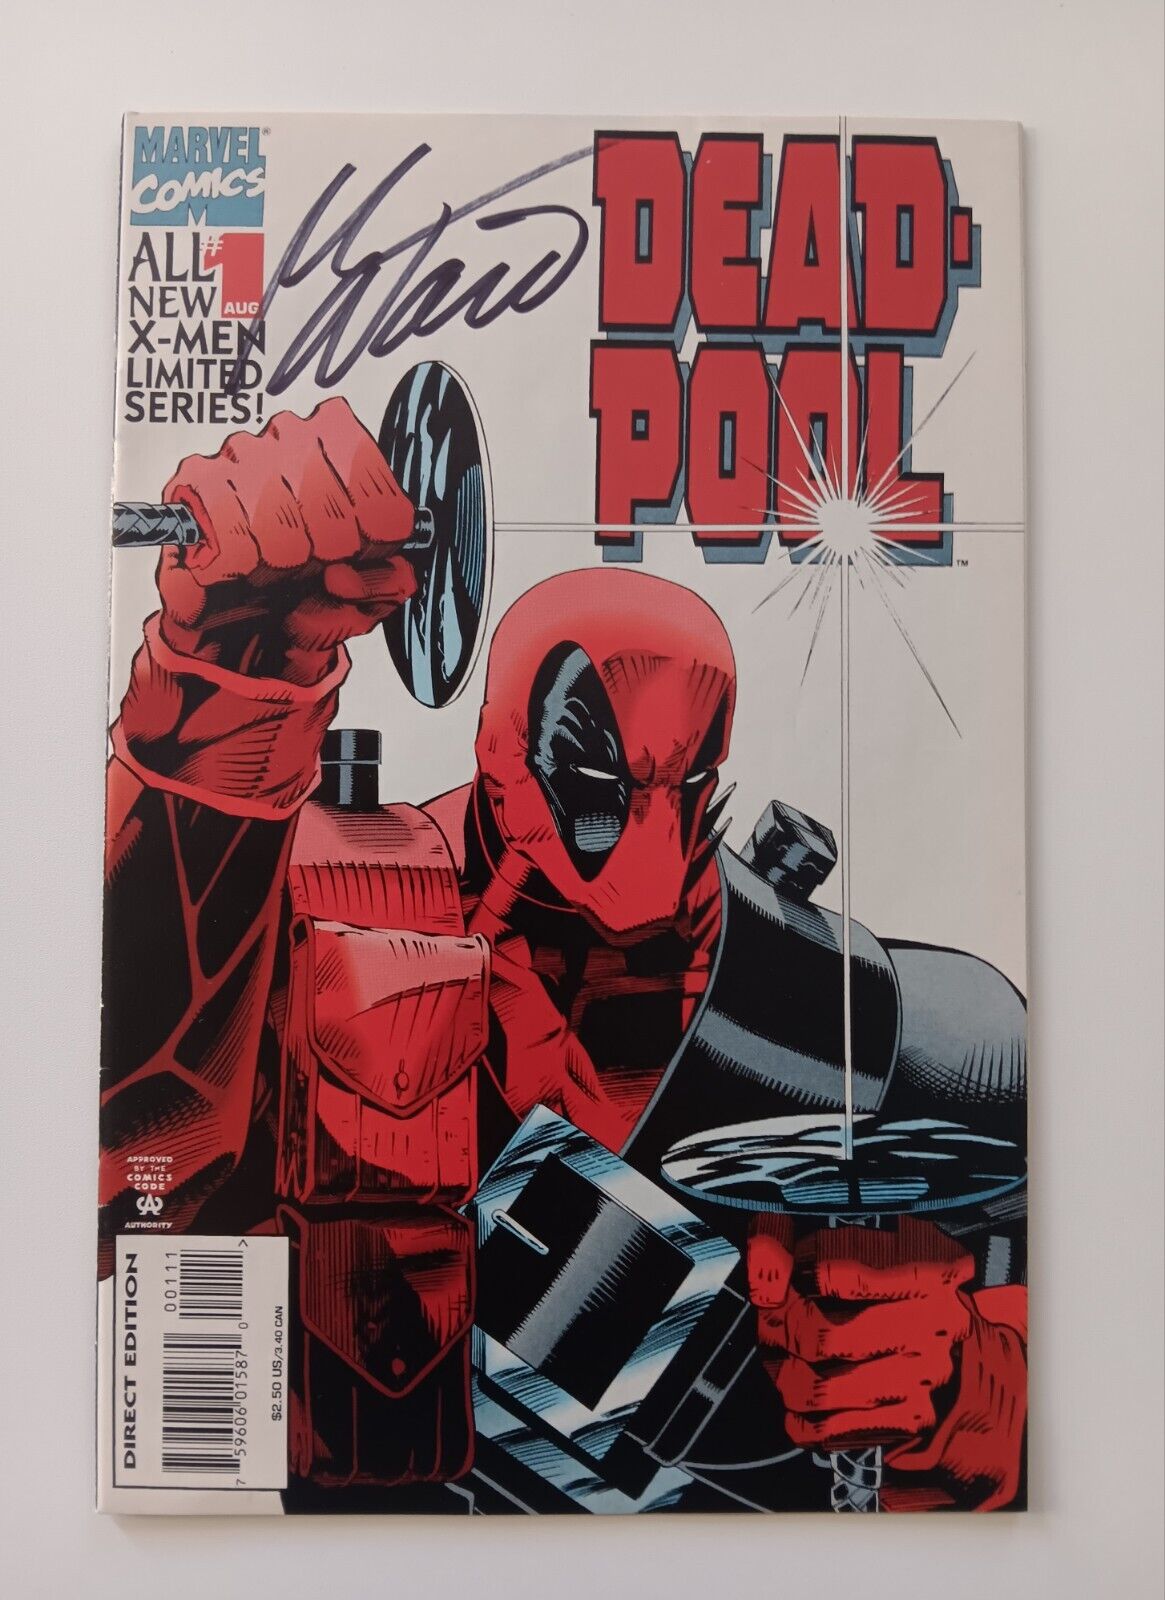 💥 1994 Deadpool # 1 VF+ Limited Series Signed by Mark Waid 1st App💥